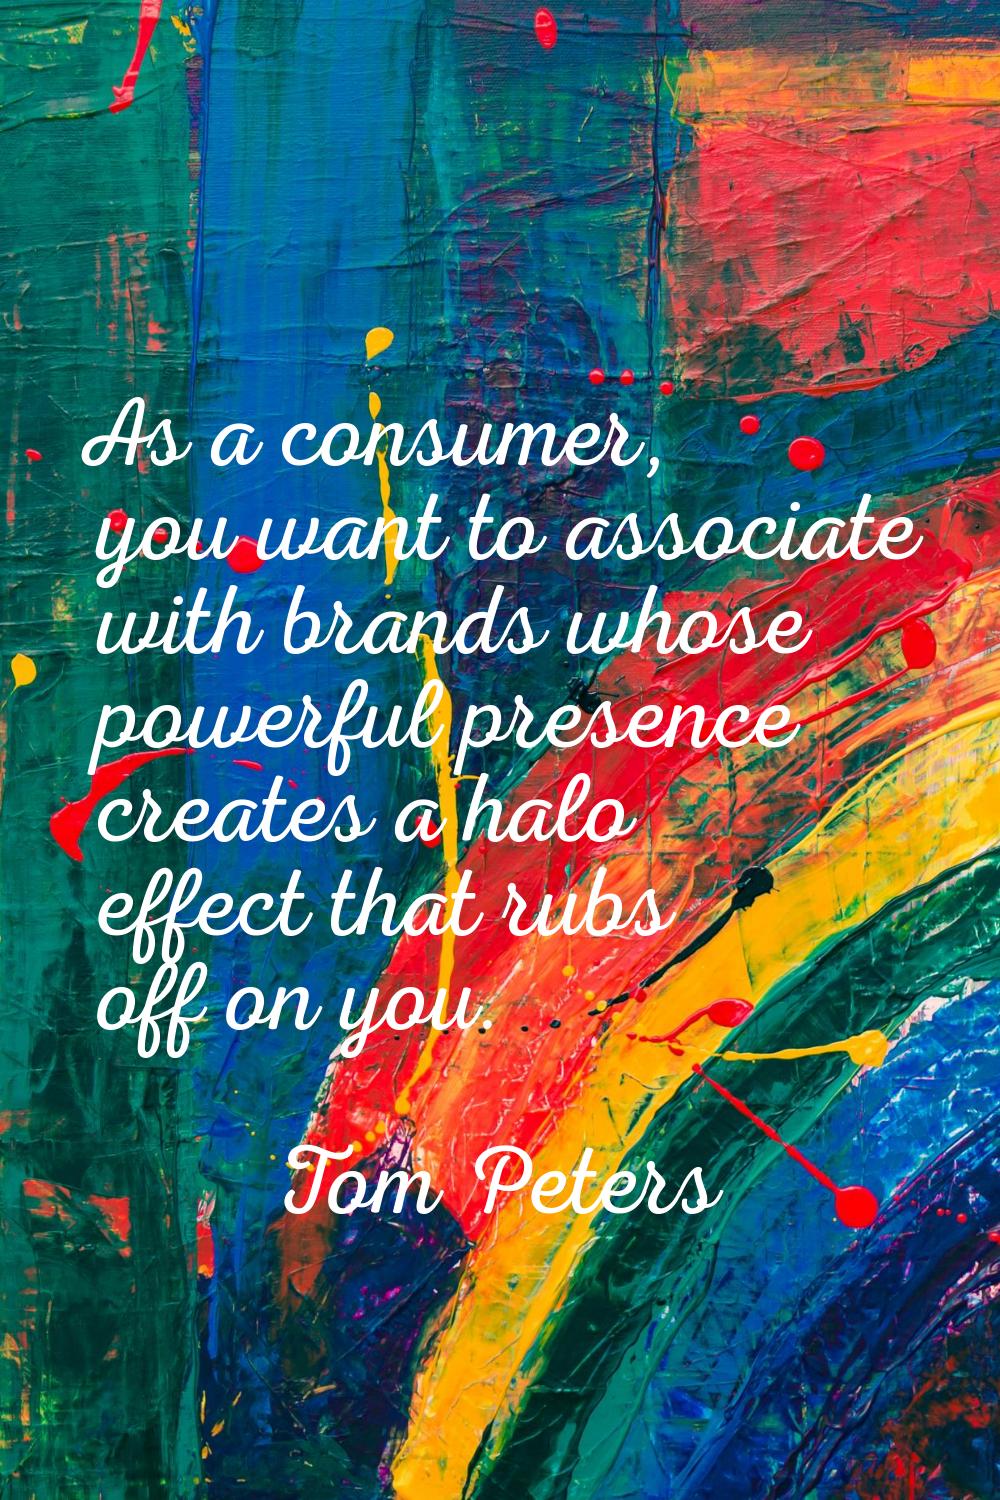 As a consumer, you want to associate with brands whose powerful presence creates a halo effect that